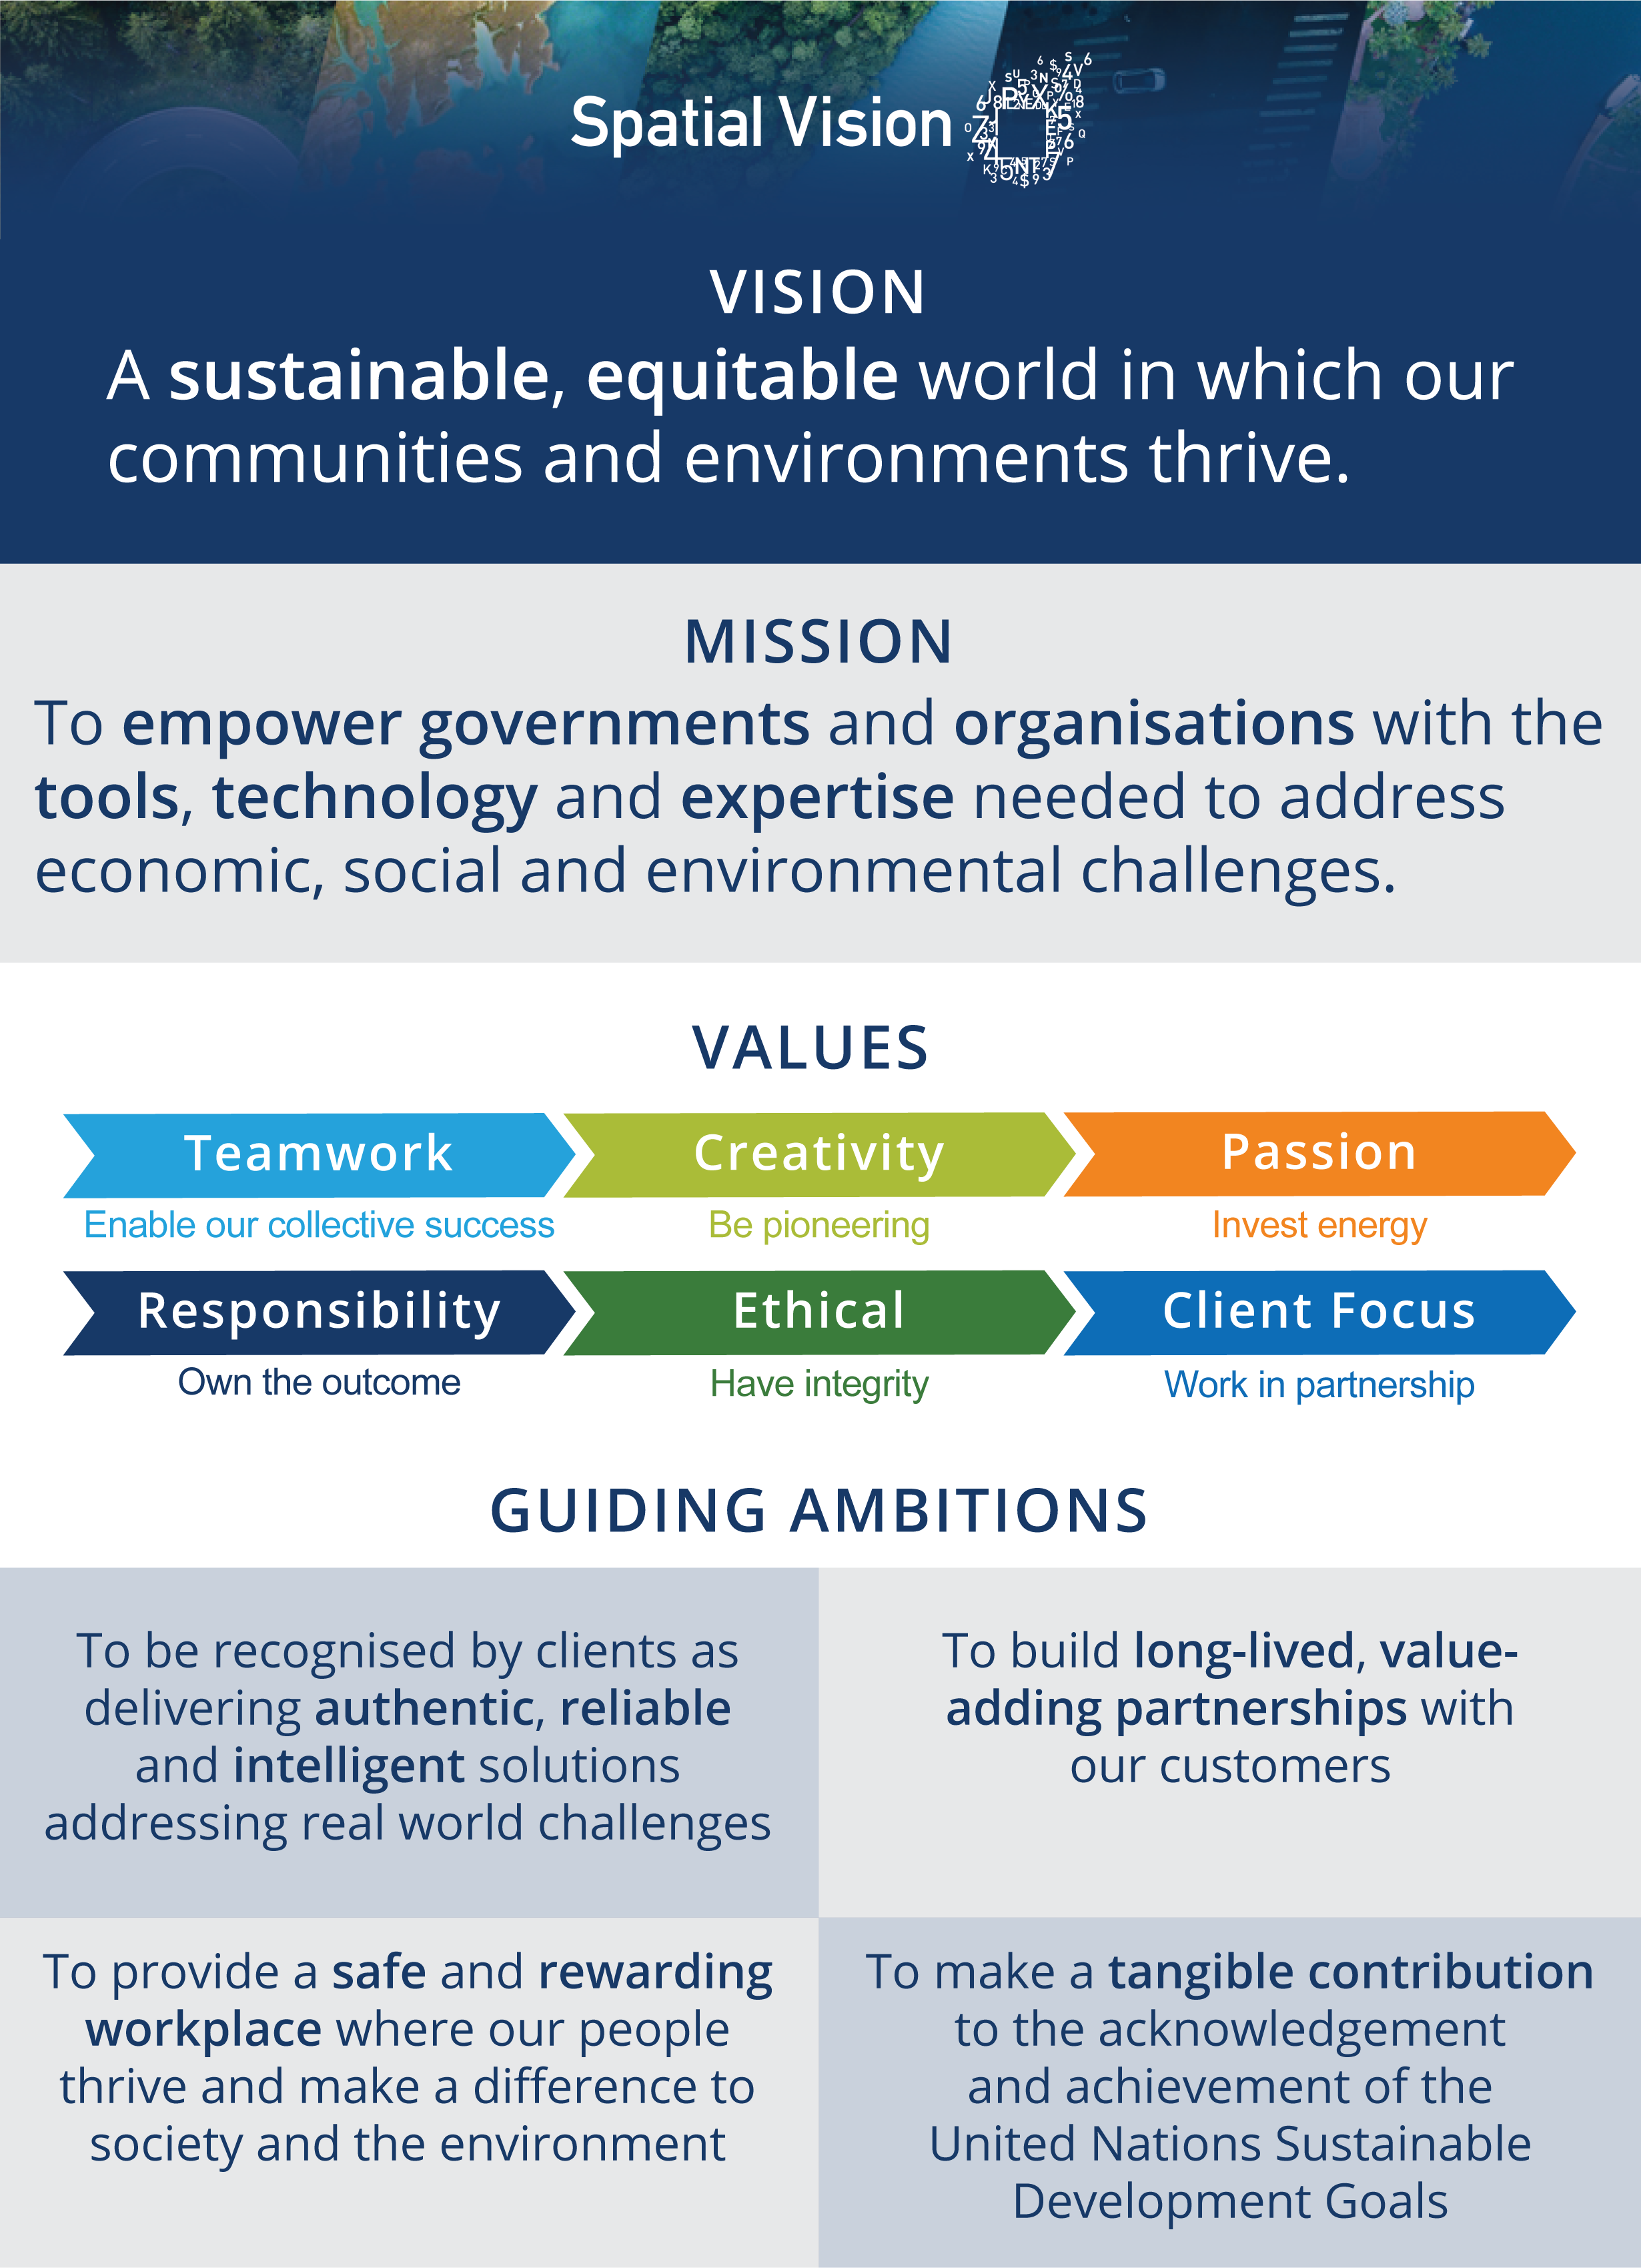 Spatial Vision's Statement of Purpose